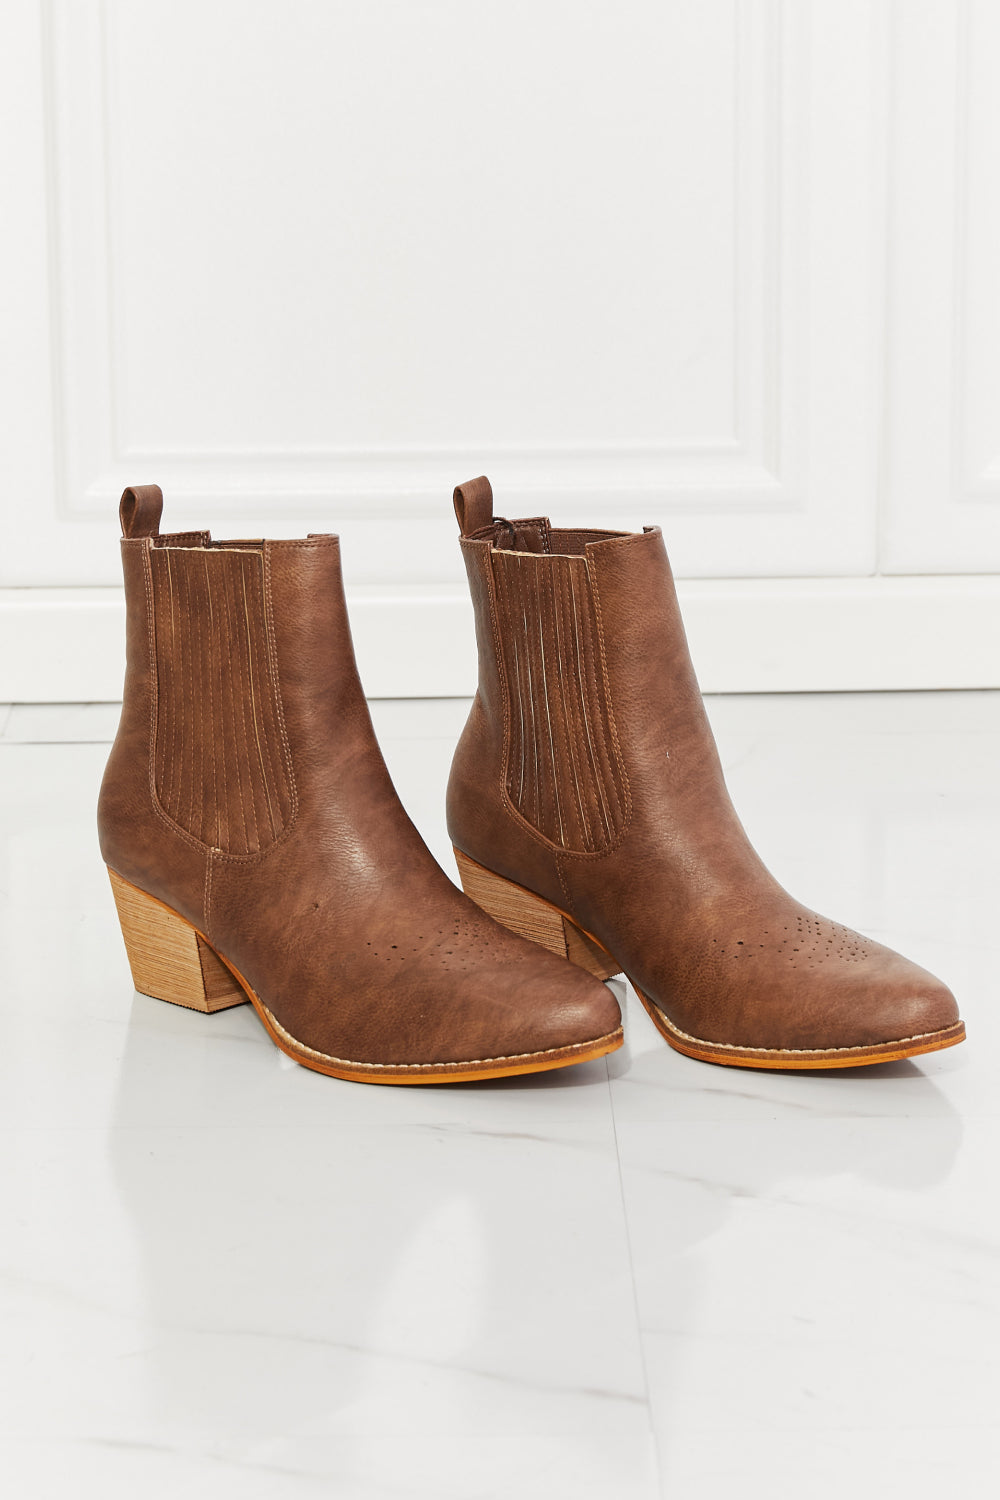 MMShoes Love the Journey Stacked Heel Chelsea Boot in Chestnut The Stout Steer